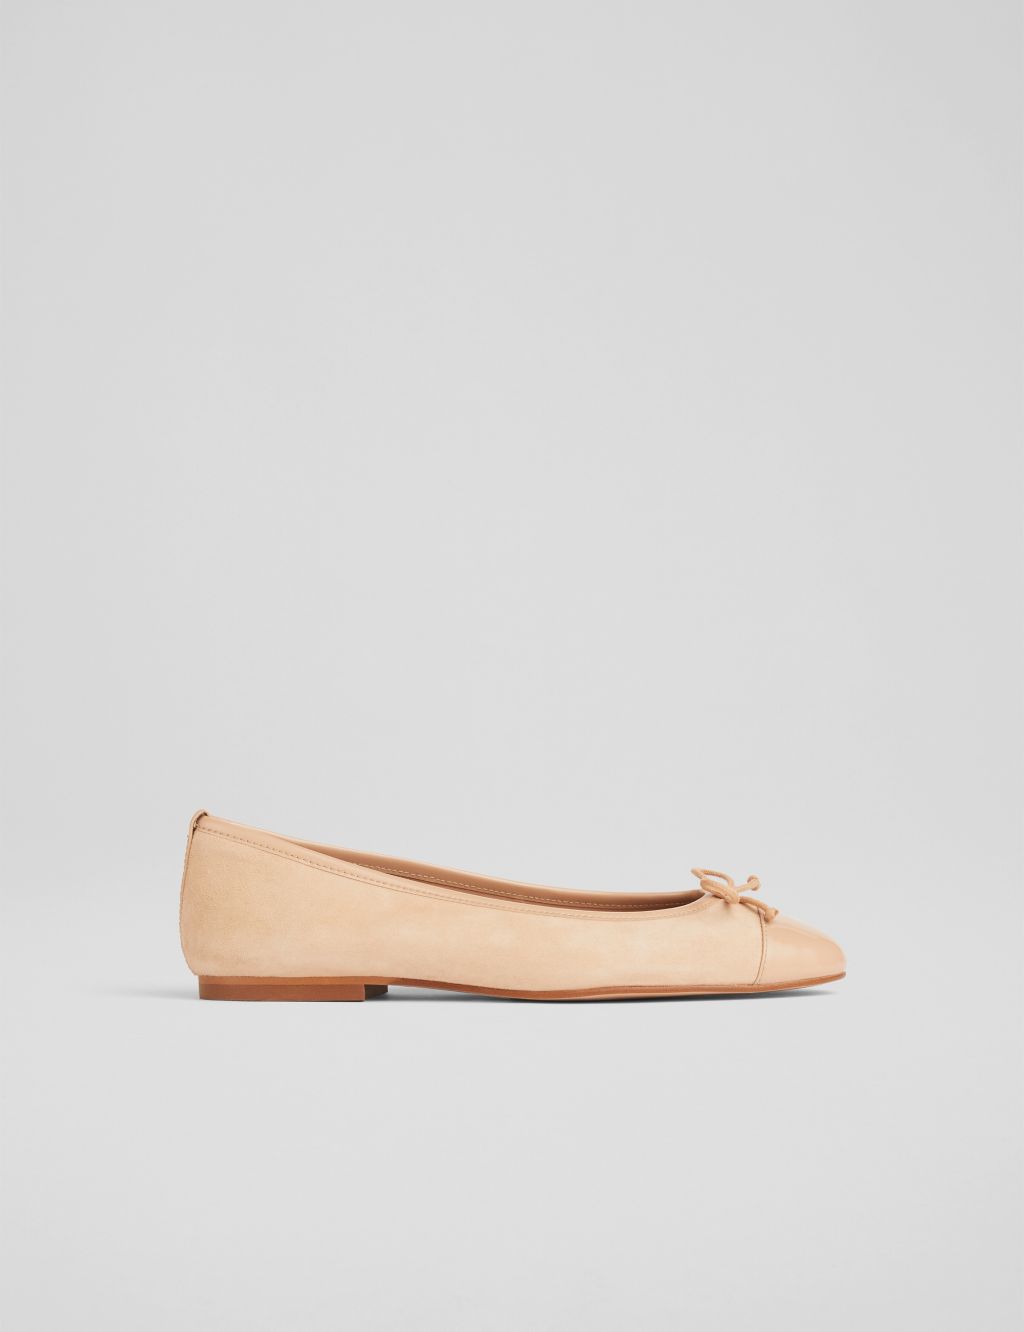 Leather Bow Slip On Ballet Pumps